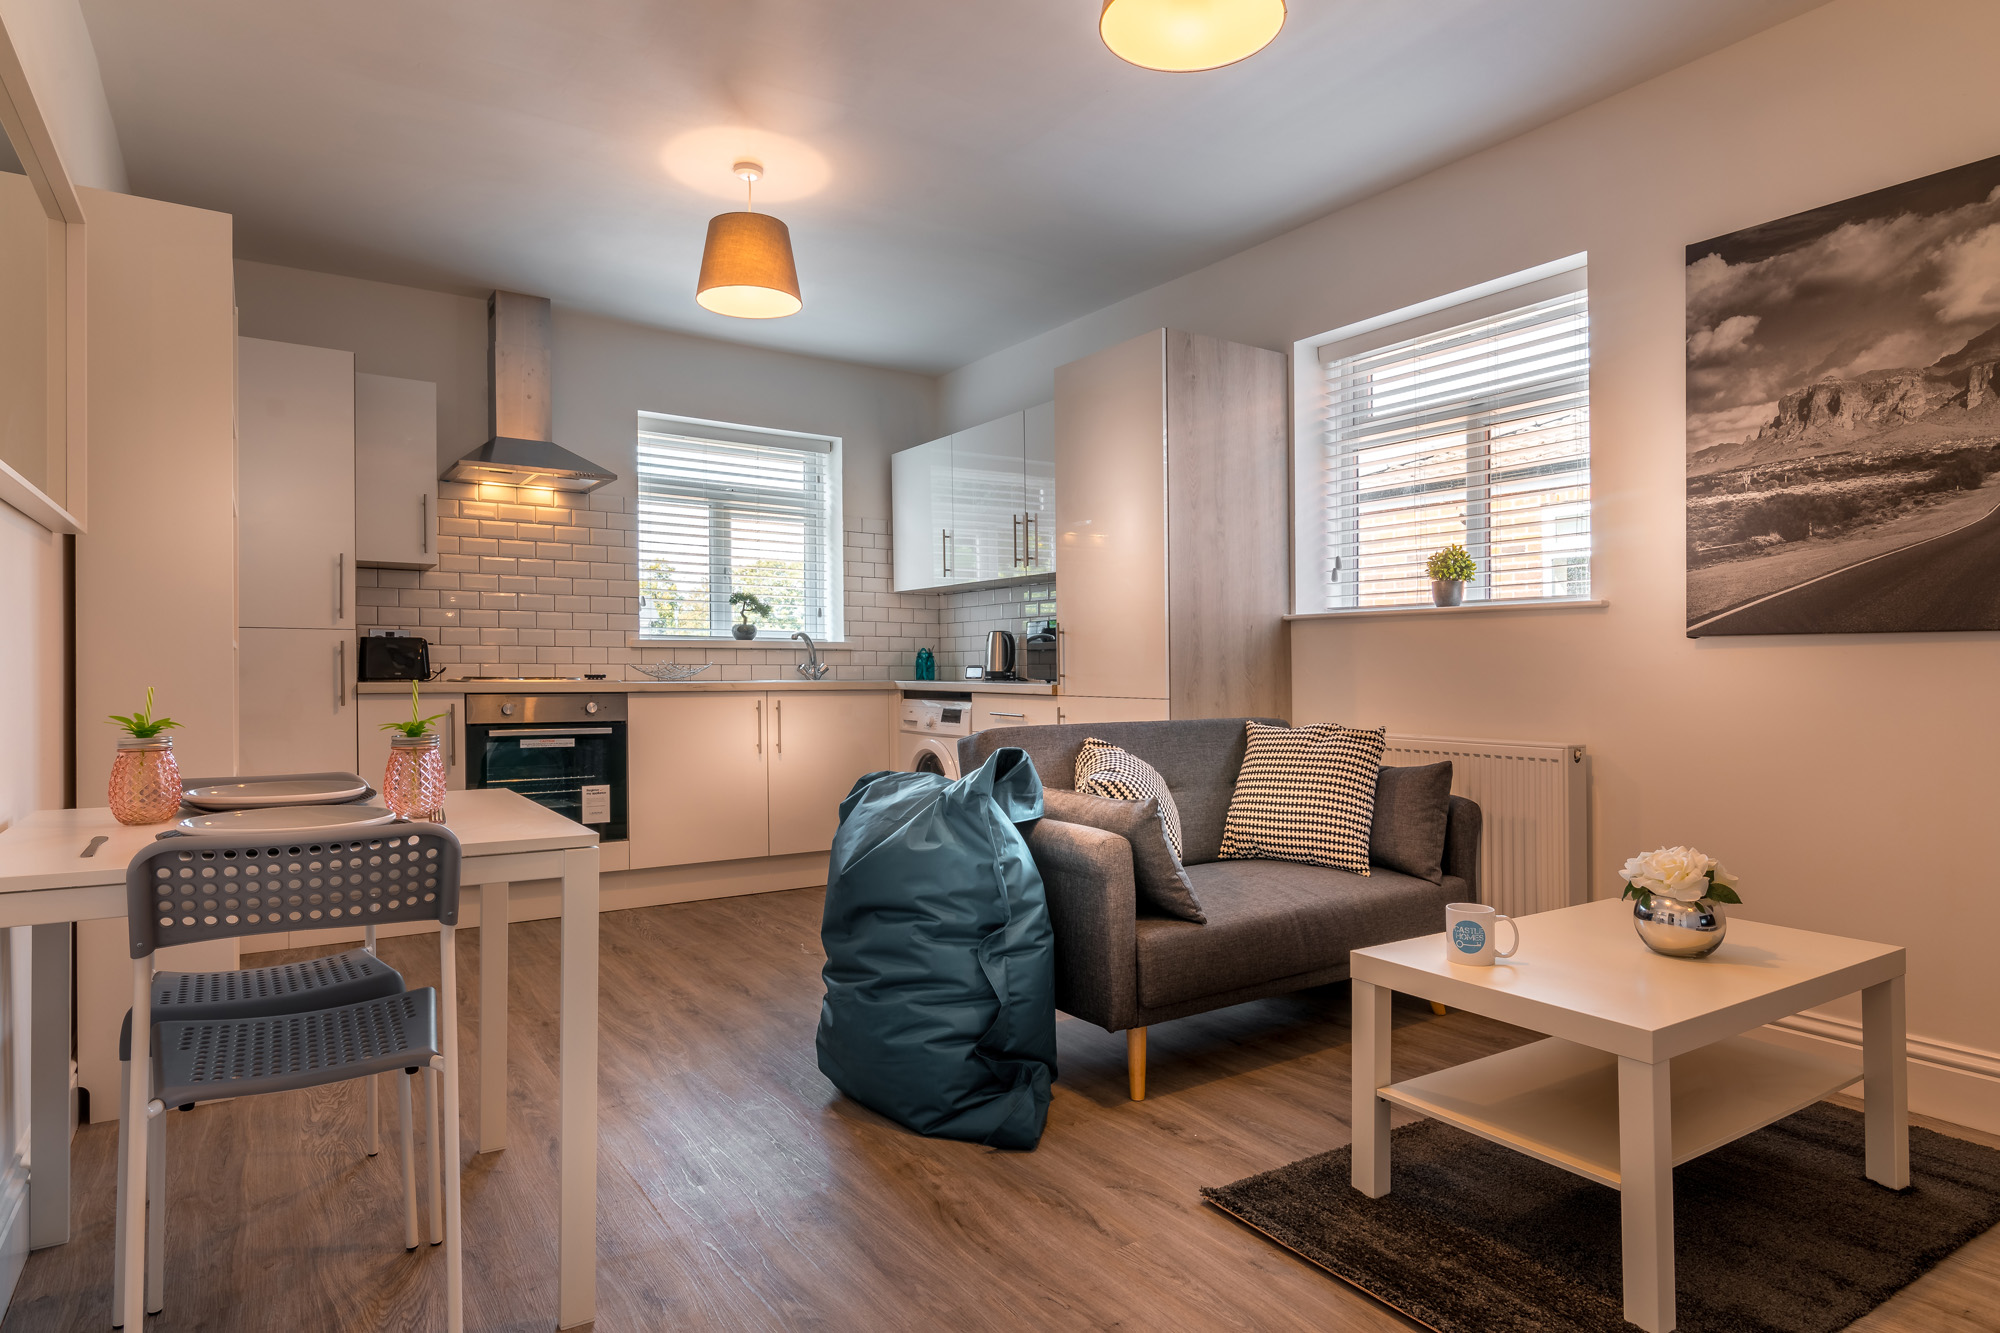 student accommodation hull, student accommodation lets hull, student properties hull